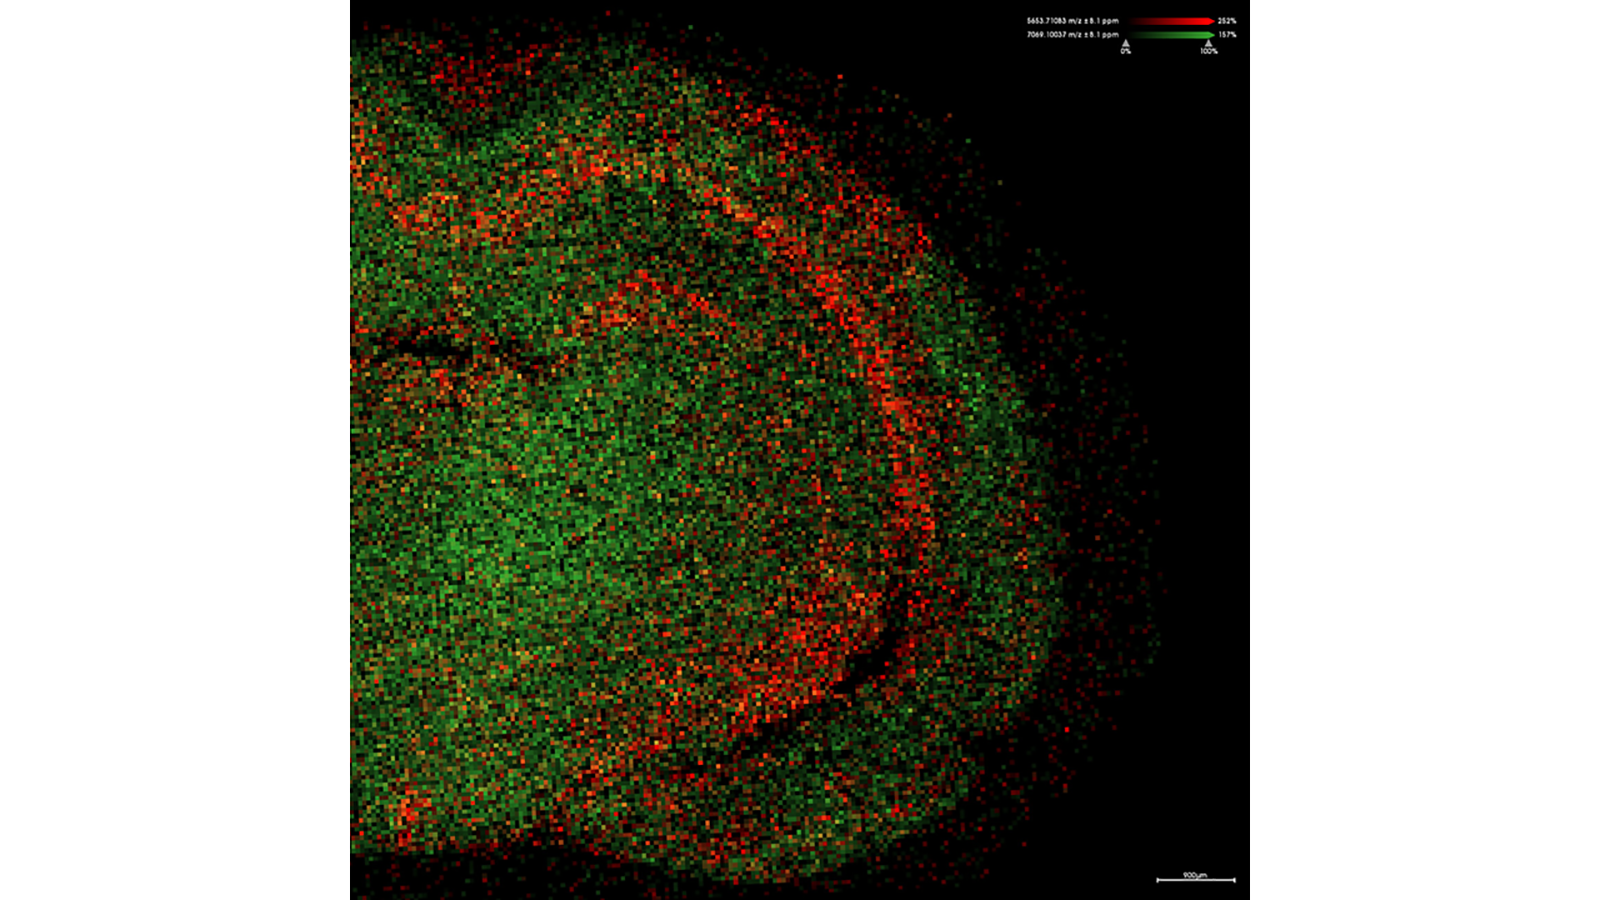 Mass spec image of H2 and H4 histones in rat brain, courtesy of Drs. Dusan Velickovic and Kevin Zemaitis at PNNL